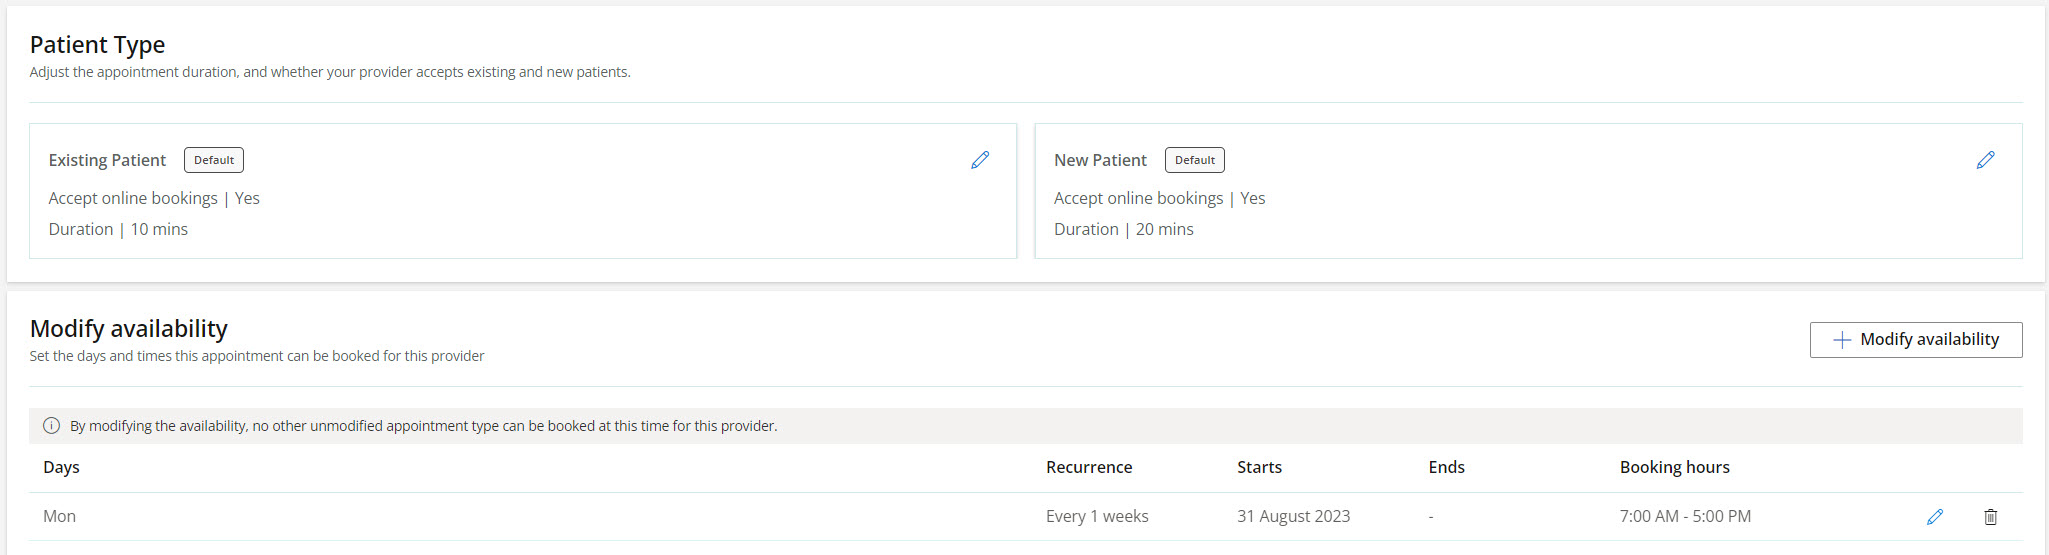 Modify the appointment type and select the appointment types that can be booked online for the provider. 